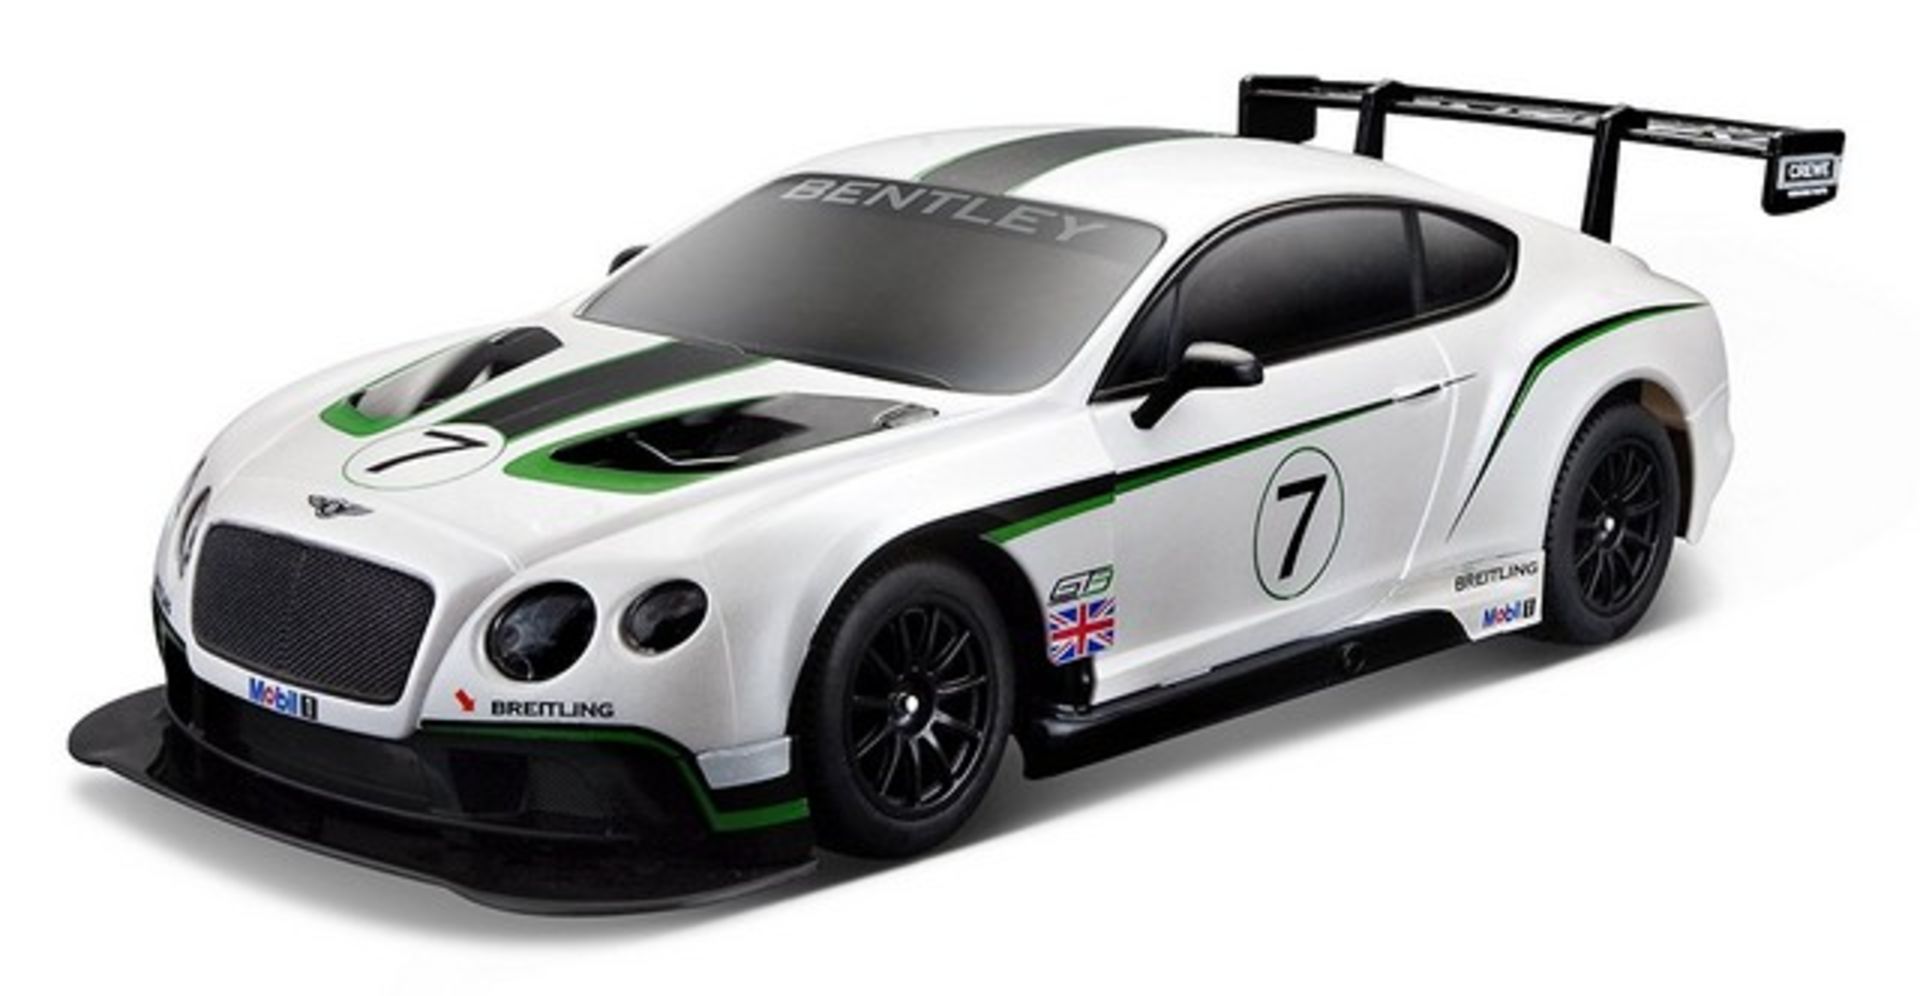 + VAT Brand New R/C 1:14 Scale Bentley Continental GT3 - Amazon price Â£36.99 - Colours May Vary